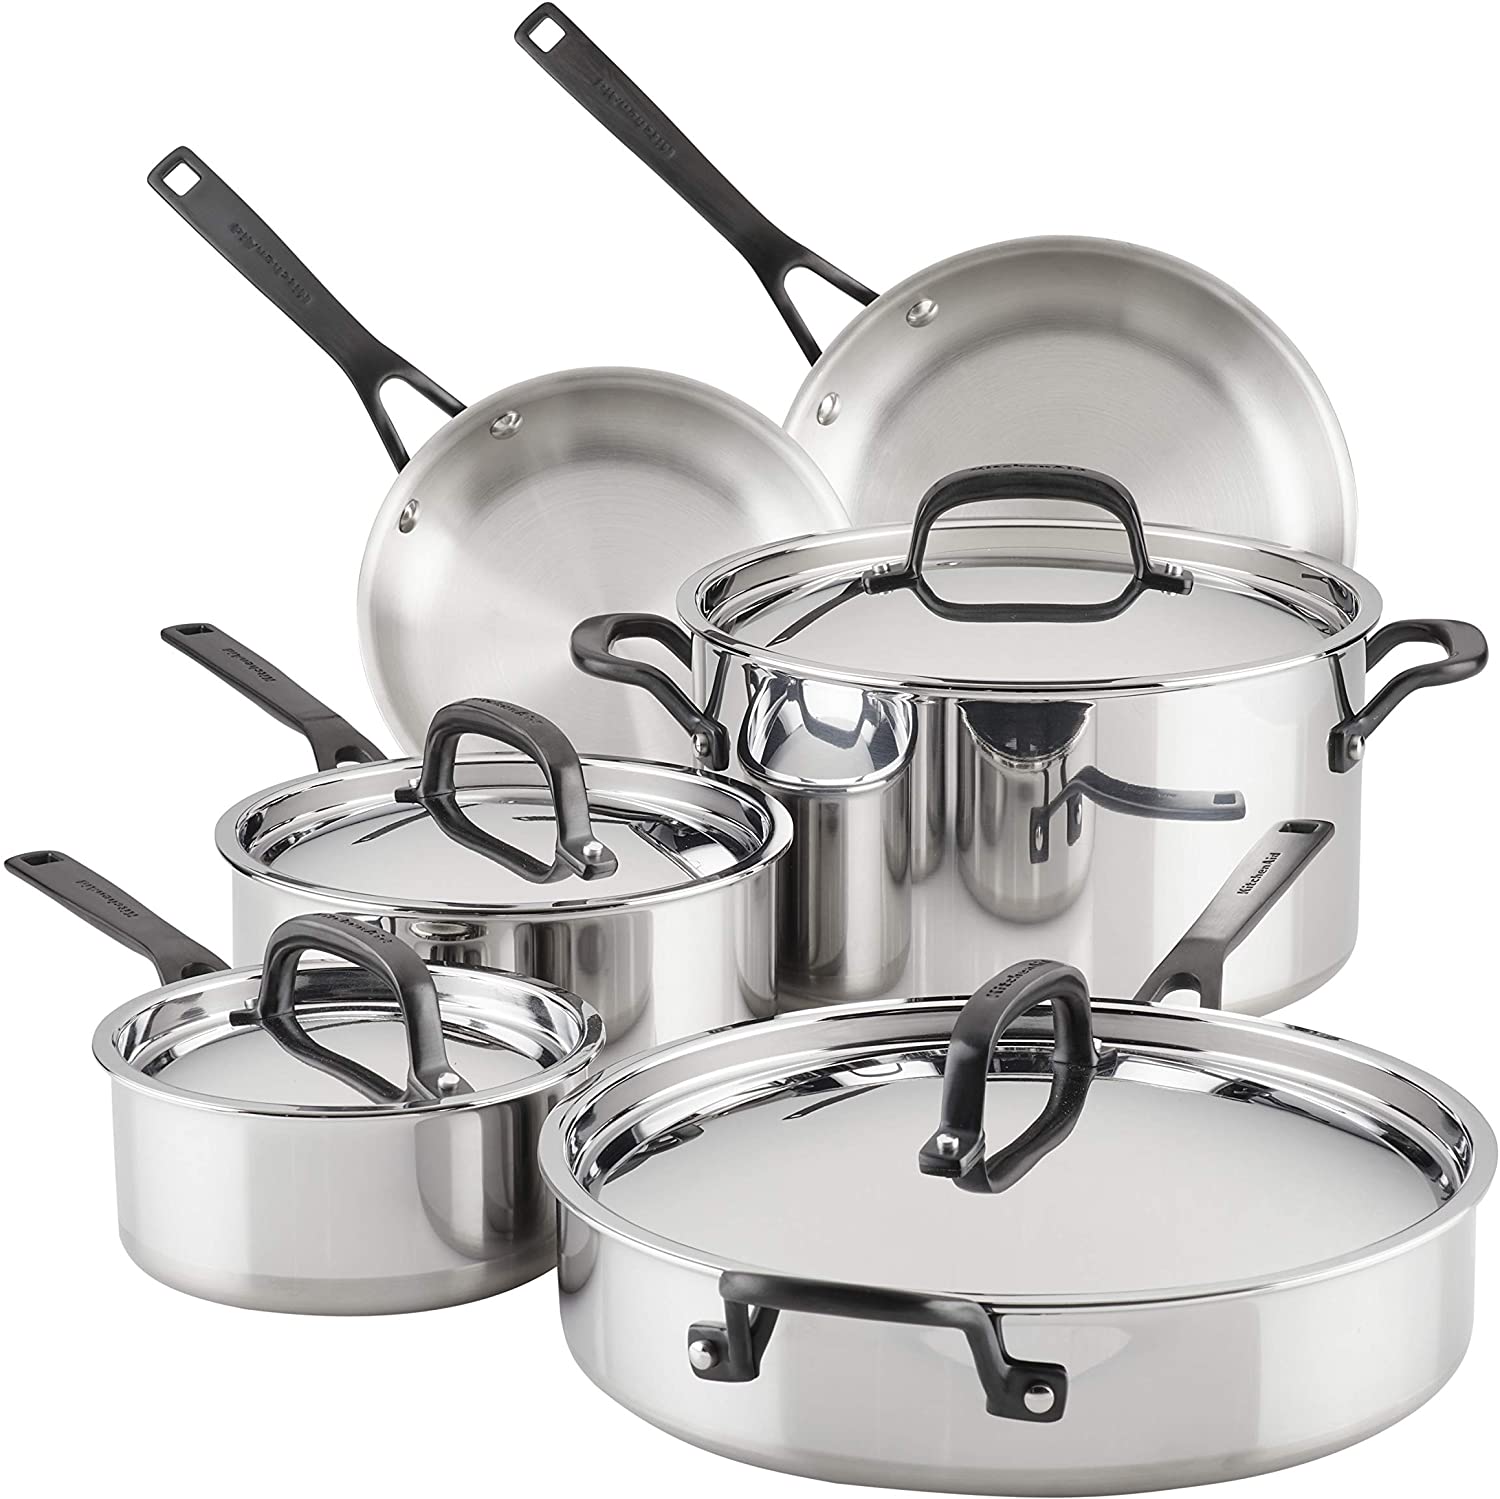 Stainless Steel Cookware Pots and Pans Set, 10 Piece